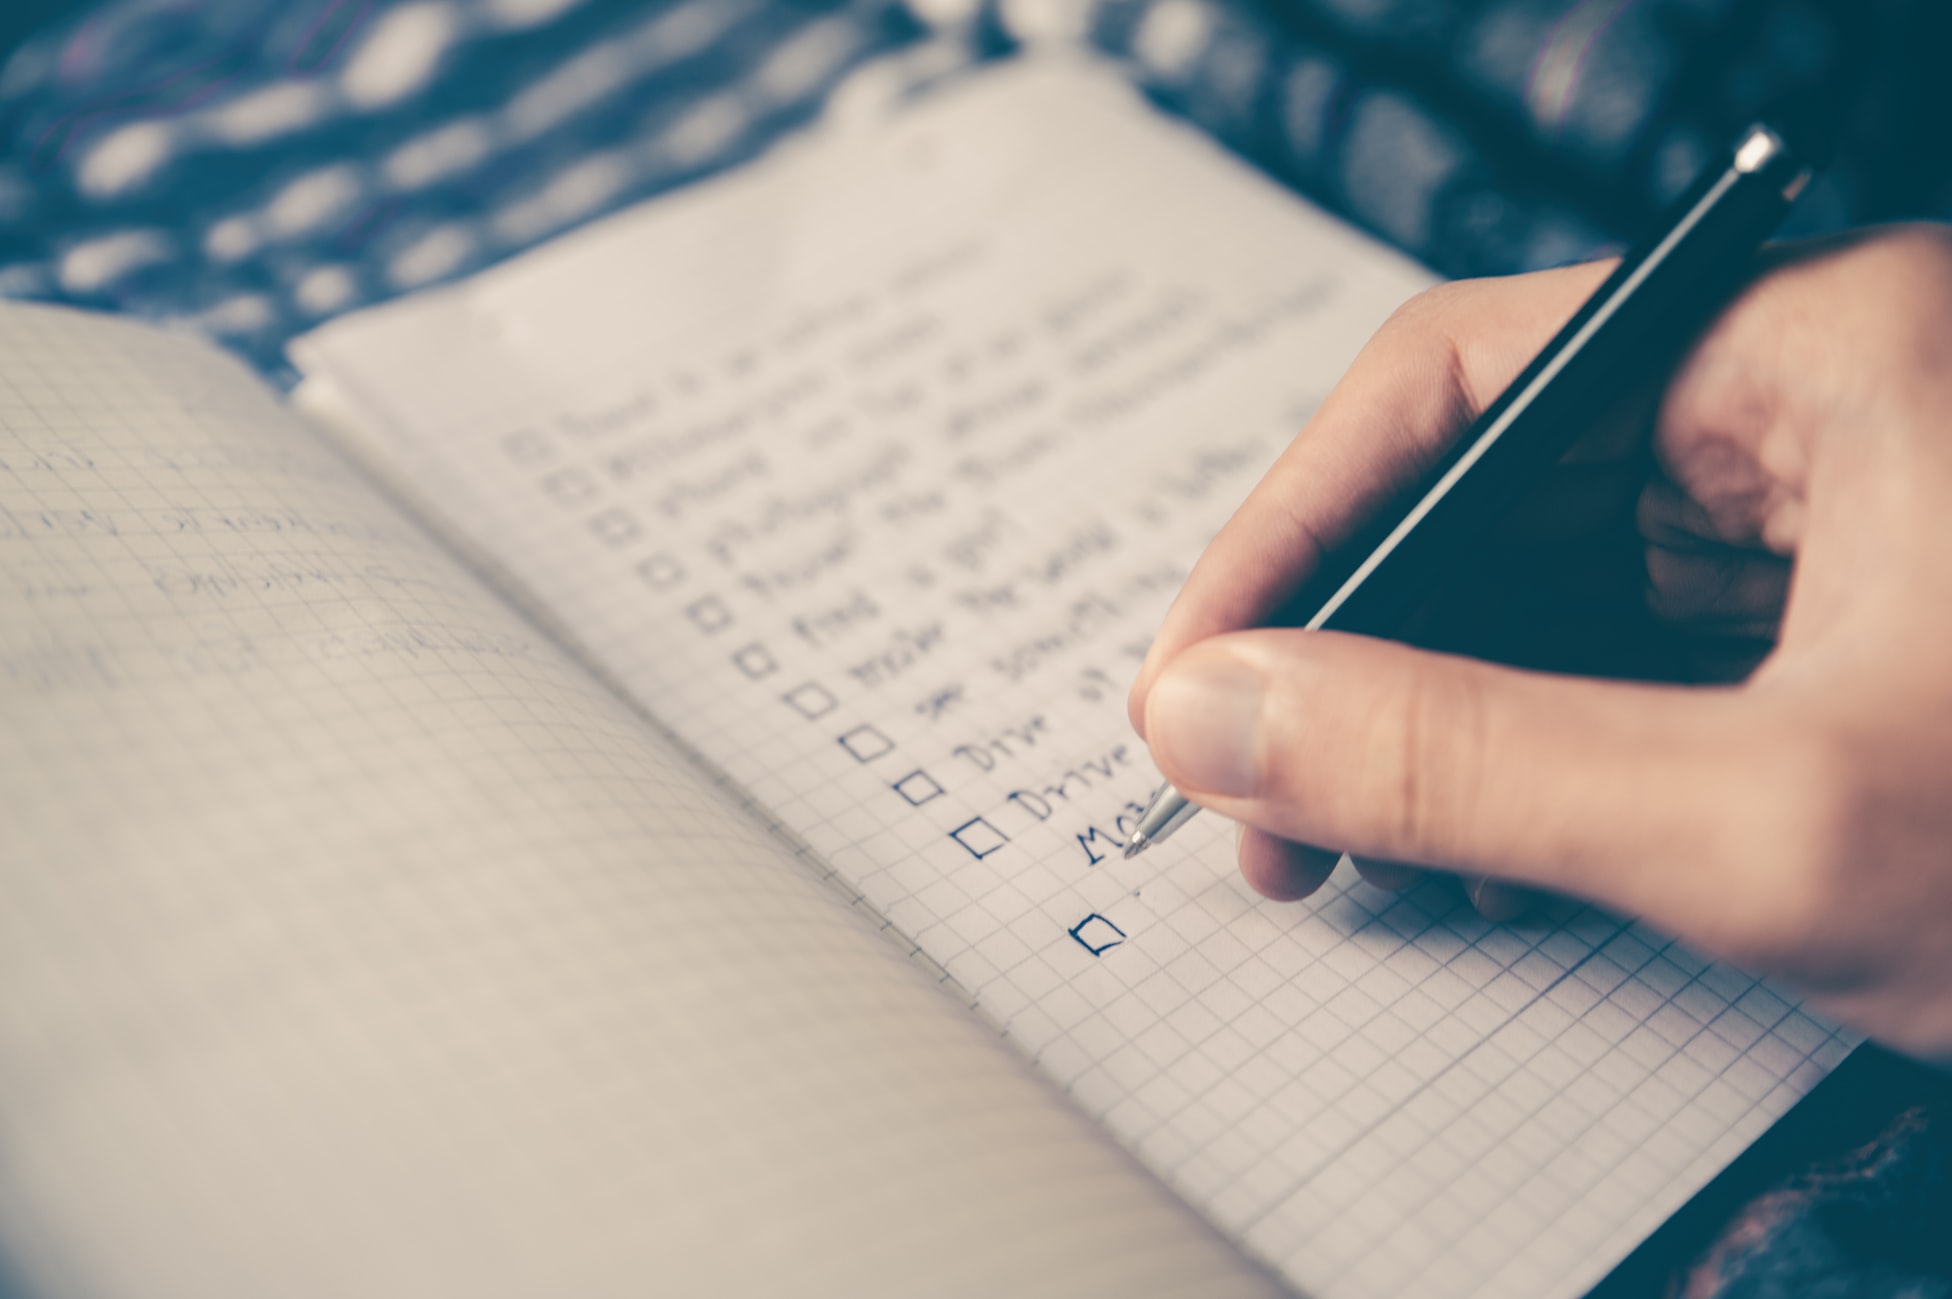 Write down specific worries you have, and if you start feeling overwhelmed, take a break. Make a list of all the possible solutions you can think of, including whatever comes to mind that could help you get by.